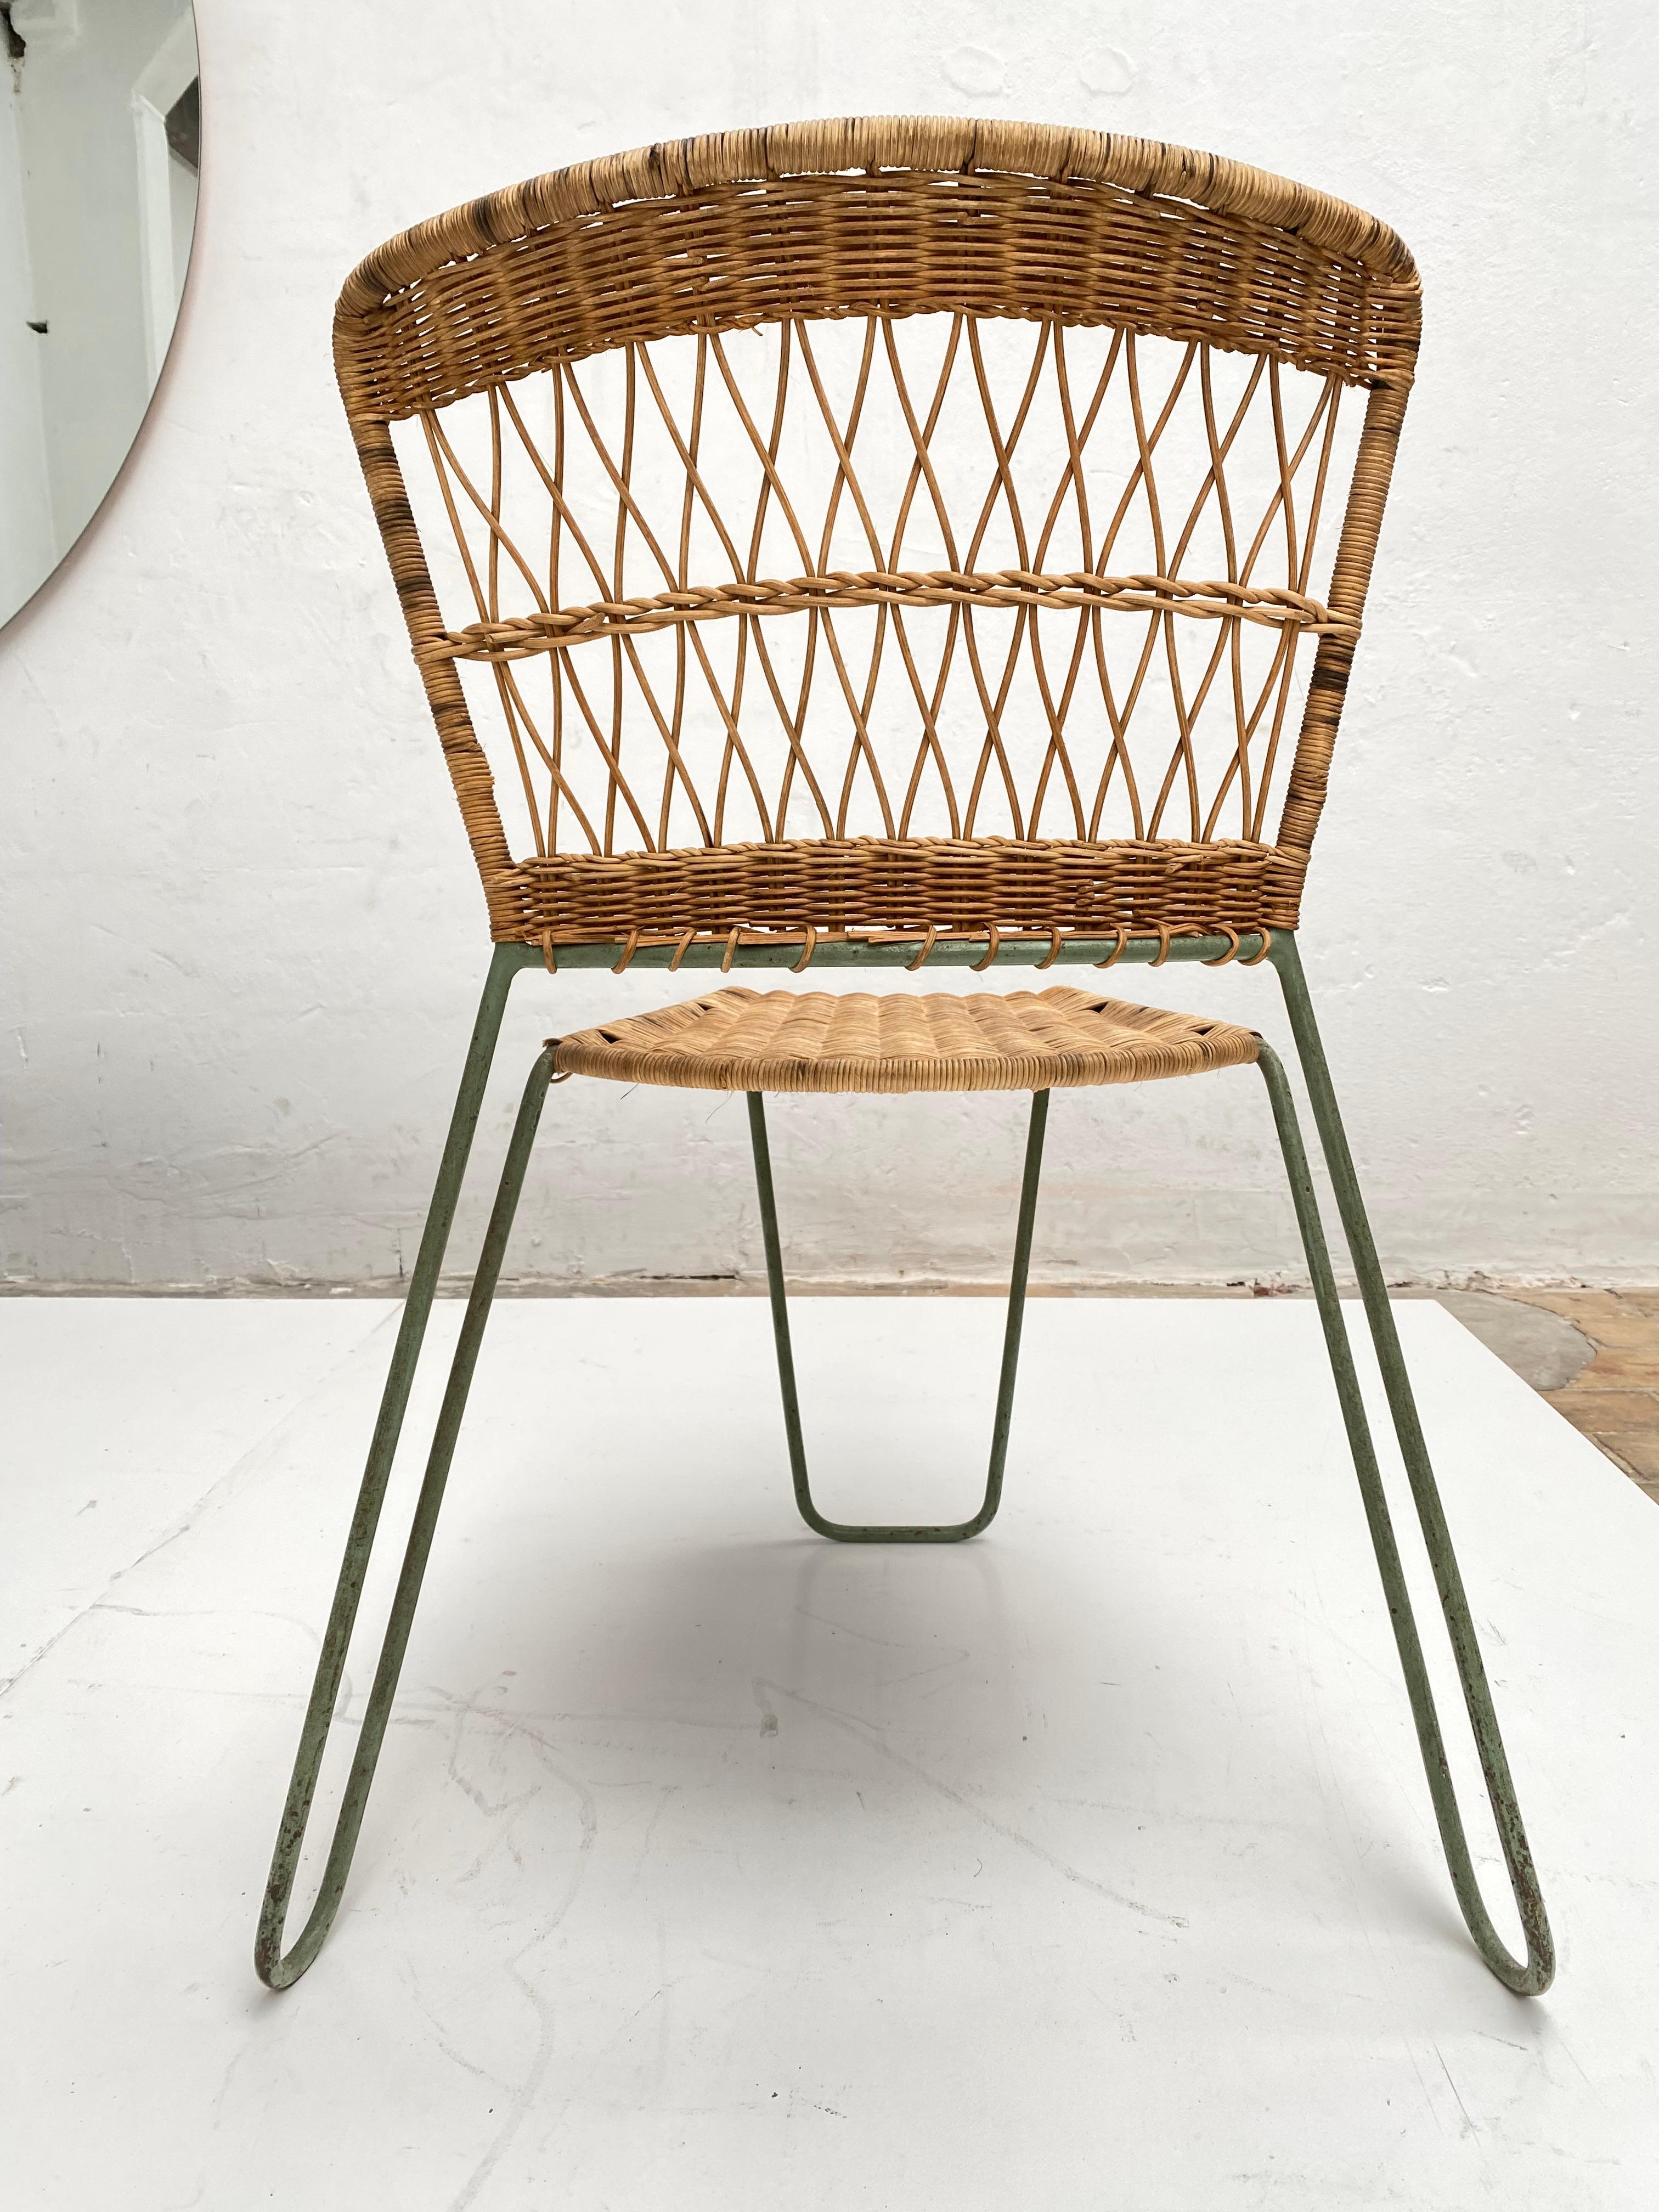 3 Sculptural Form 'Oro' Dining Chairs by Raoul Guys, 1951, Airborne, France For Sale 4